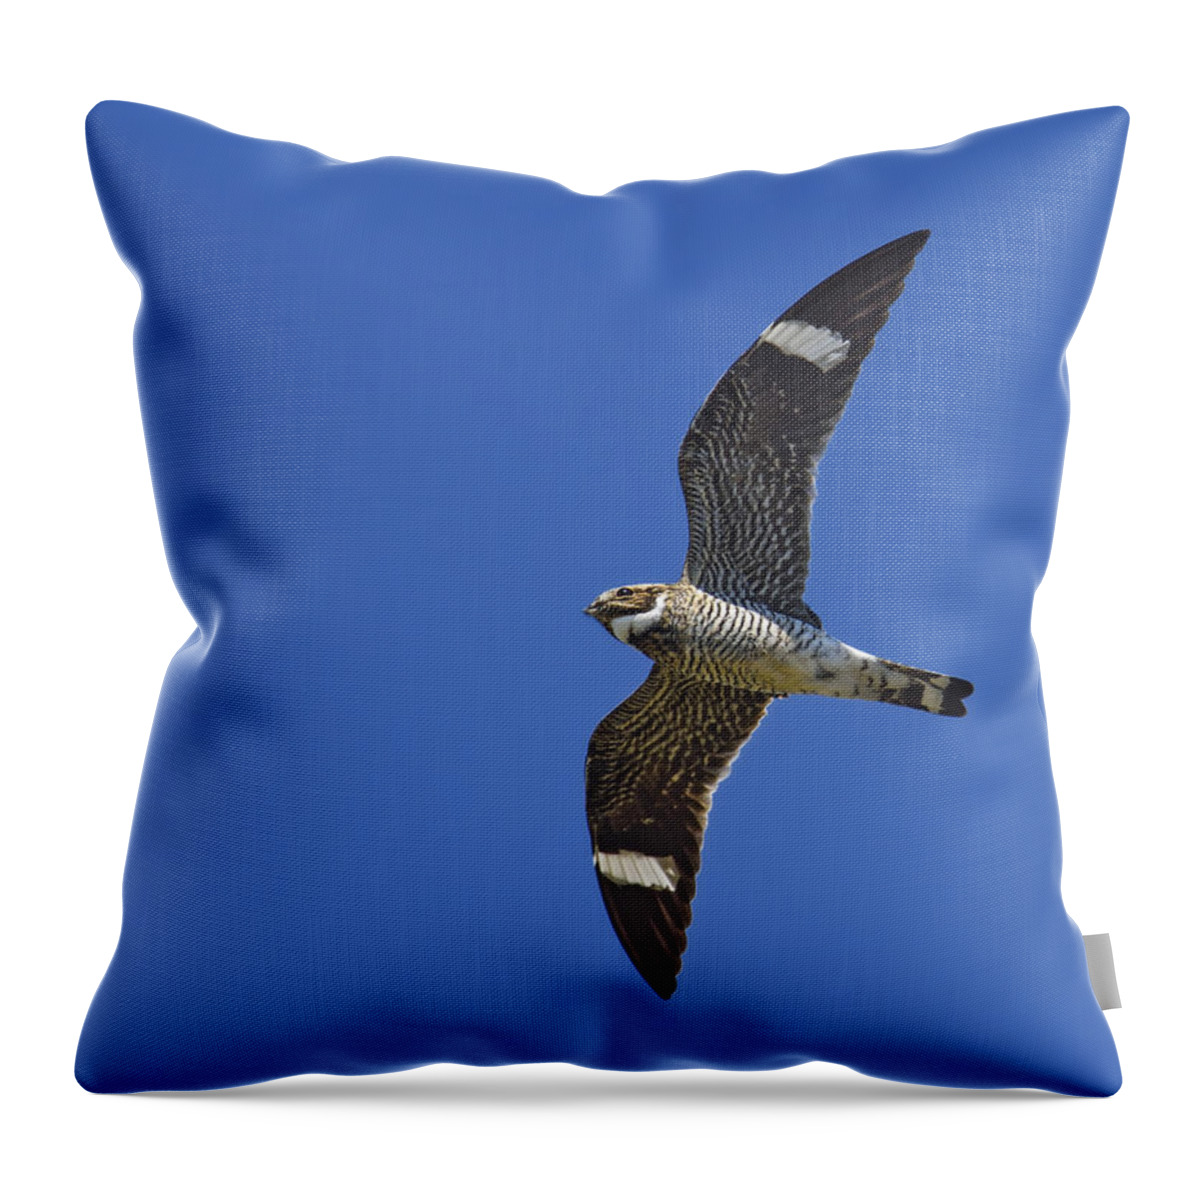 Common Nighthawk Throw Pillow featuring the photograph Common Nighthawk by Tony Beck